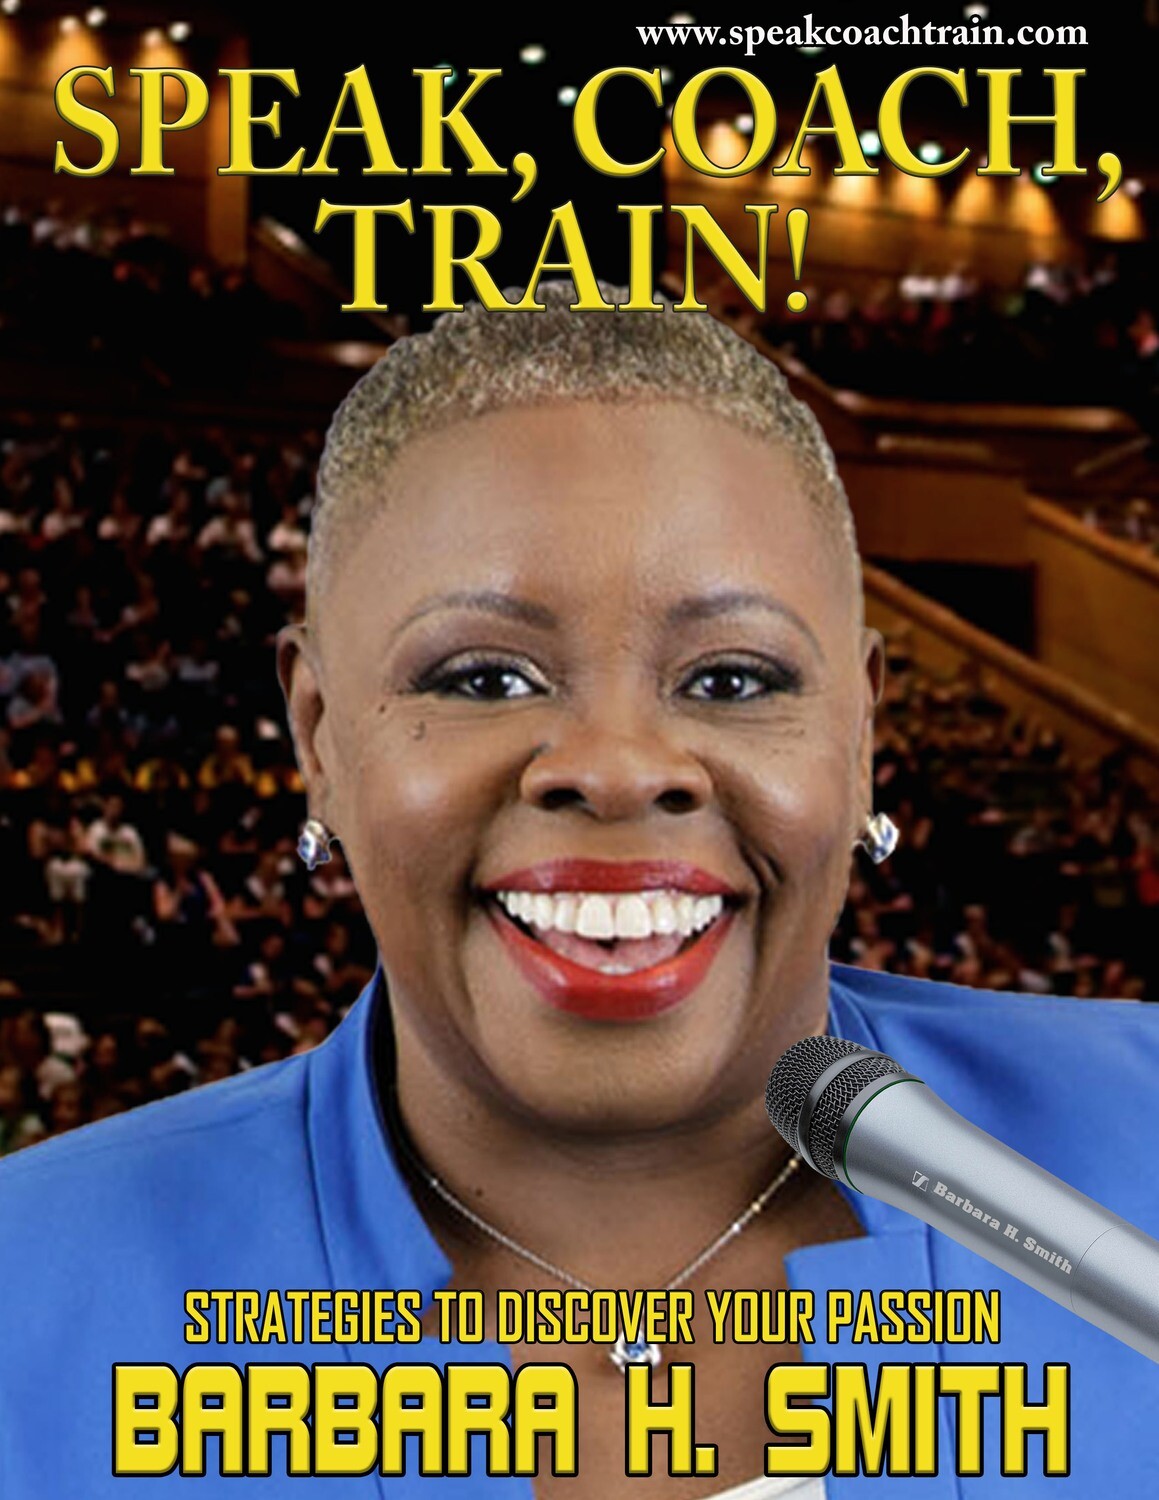 Speak, Coach, Train: Strategies to Discover Your Passion (Signed Copy)